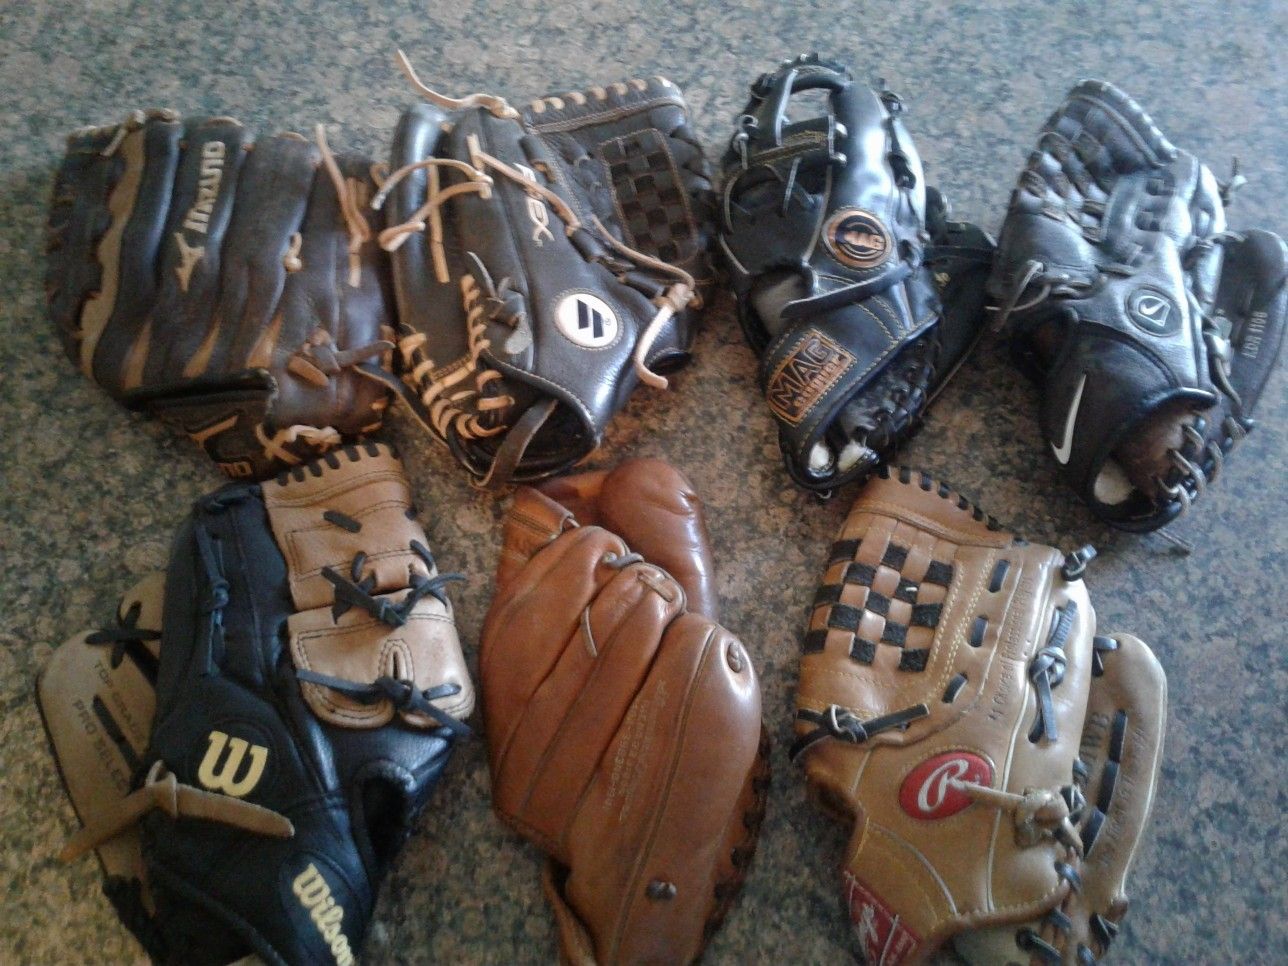 Mix lot of base ball gloves